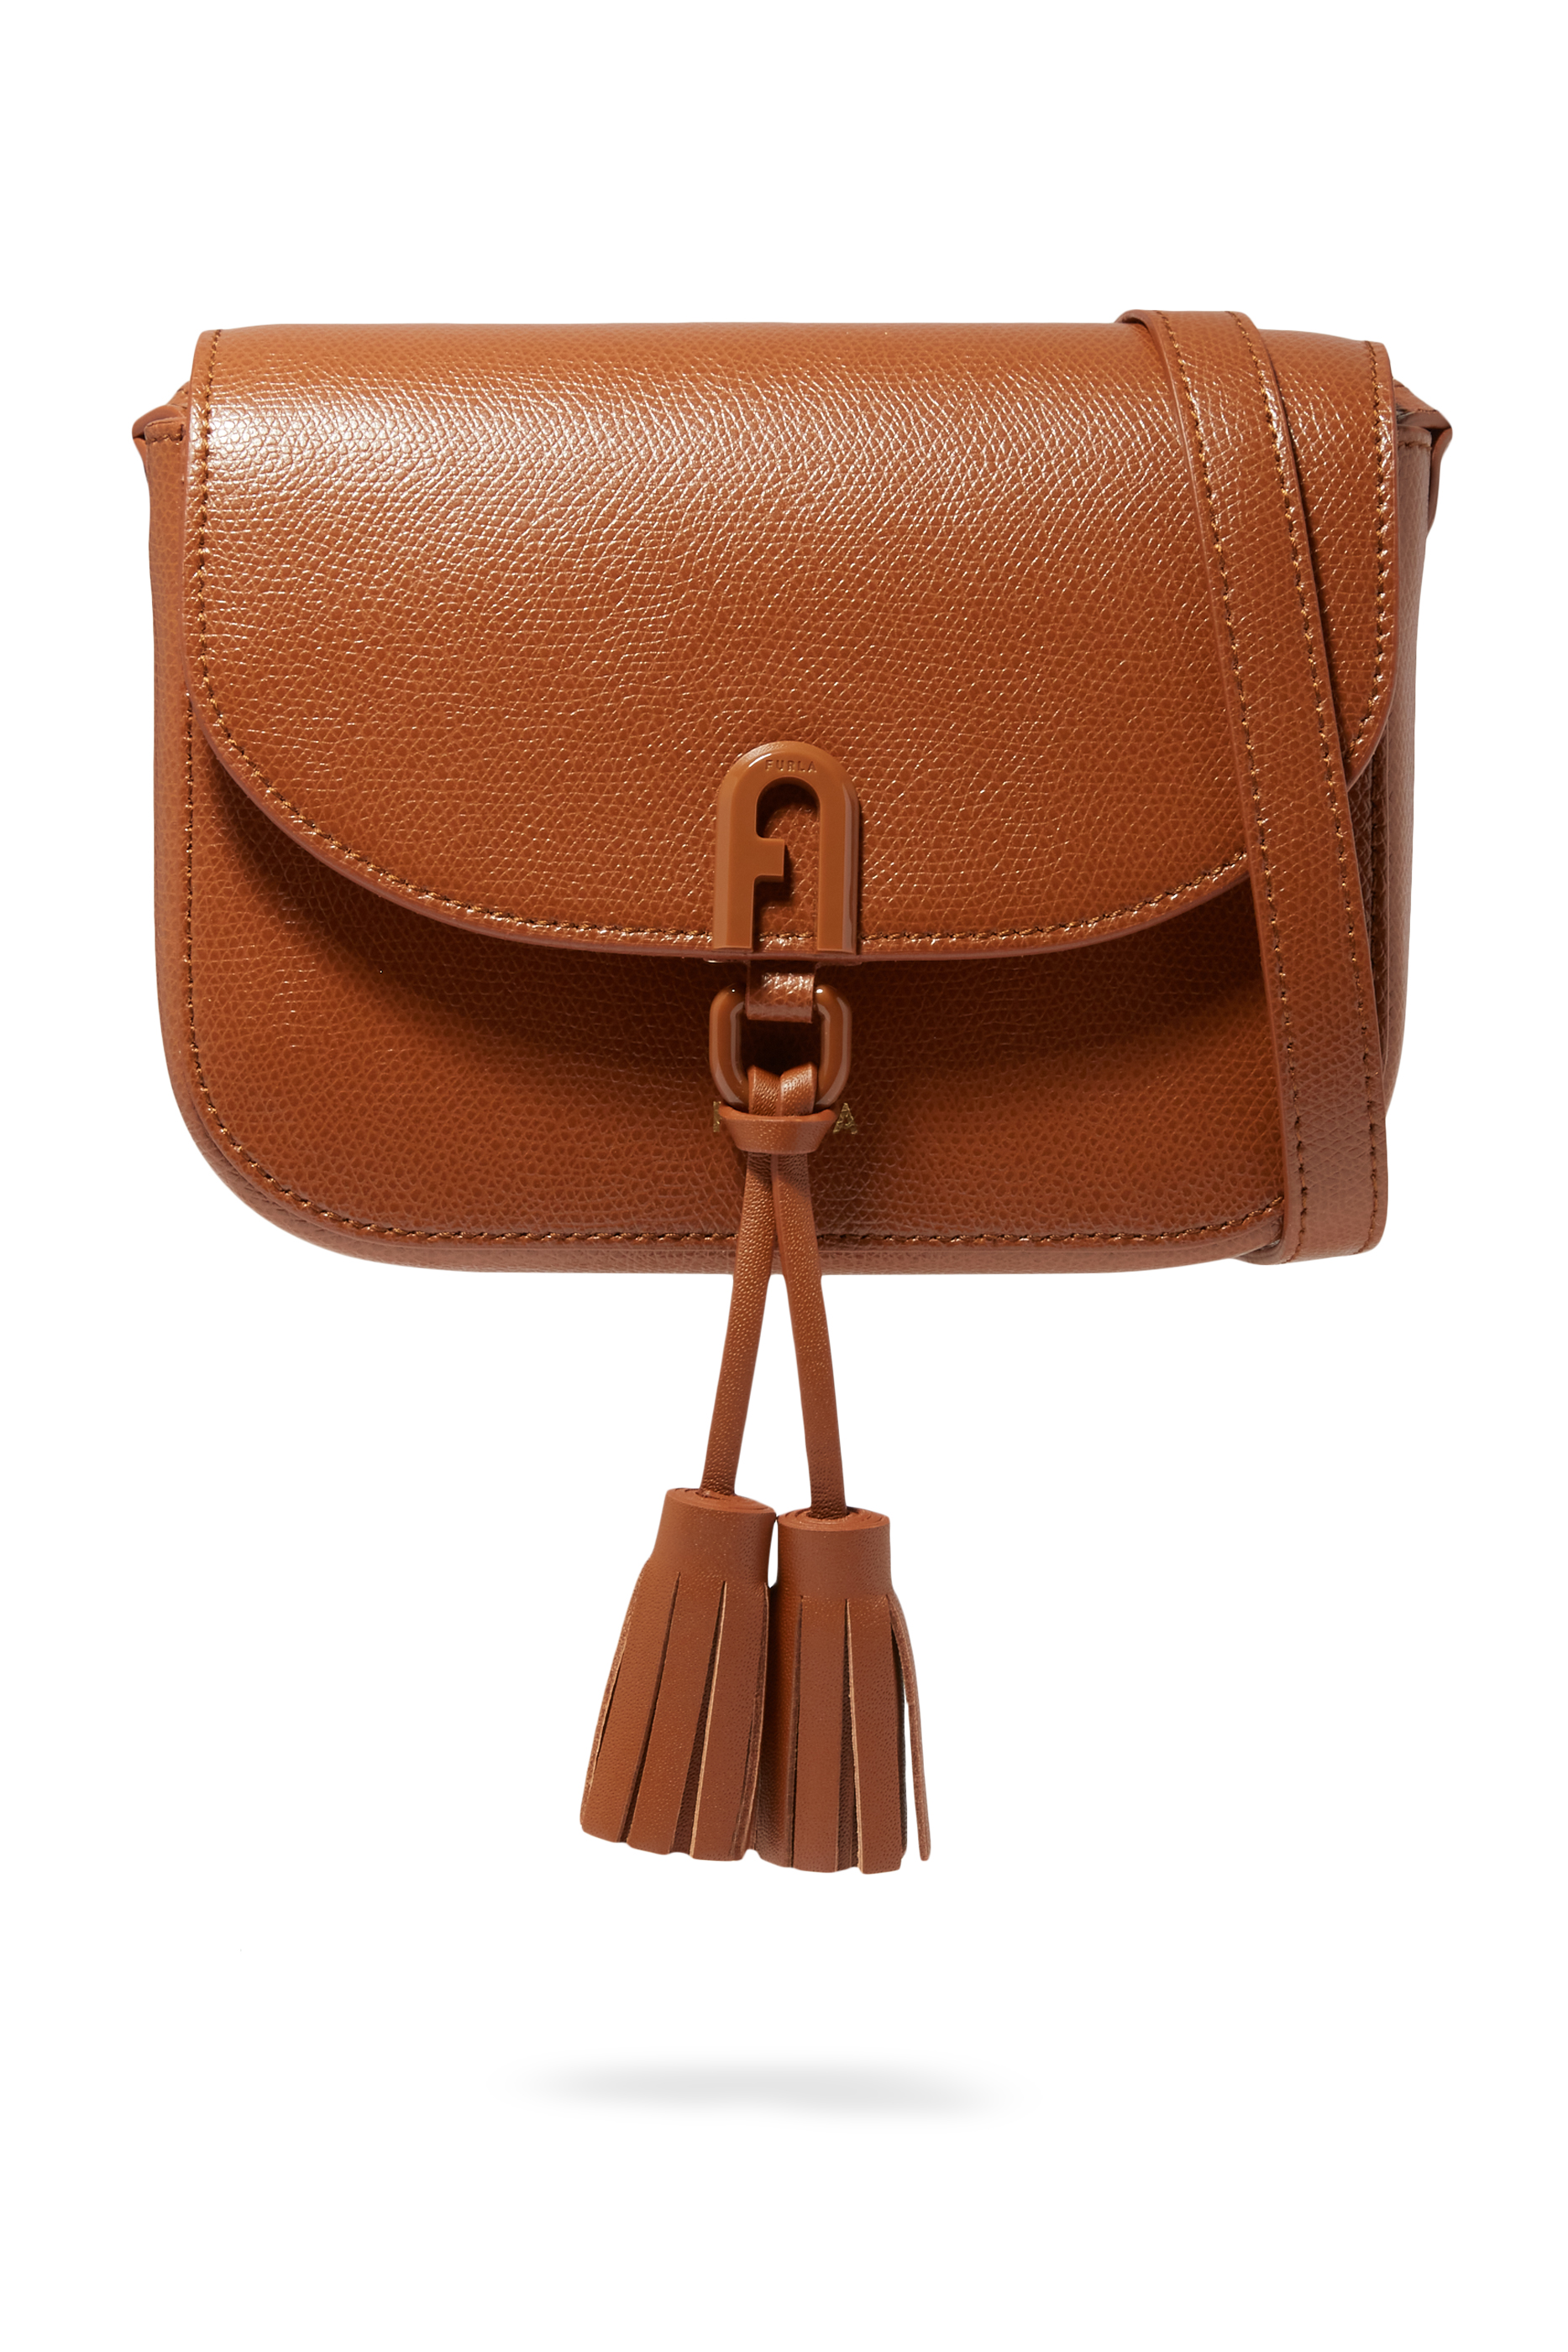 Buy Furla Mini 1927 Leather Cross-Body Bag - Womens for AED 535.00 Sale